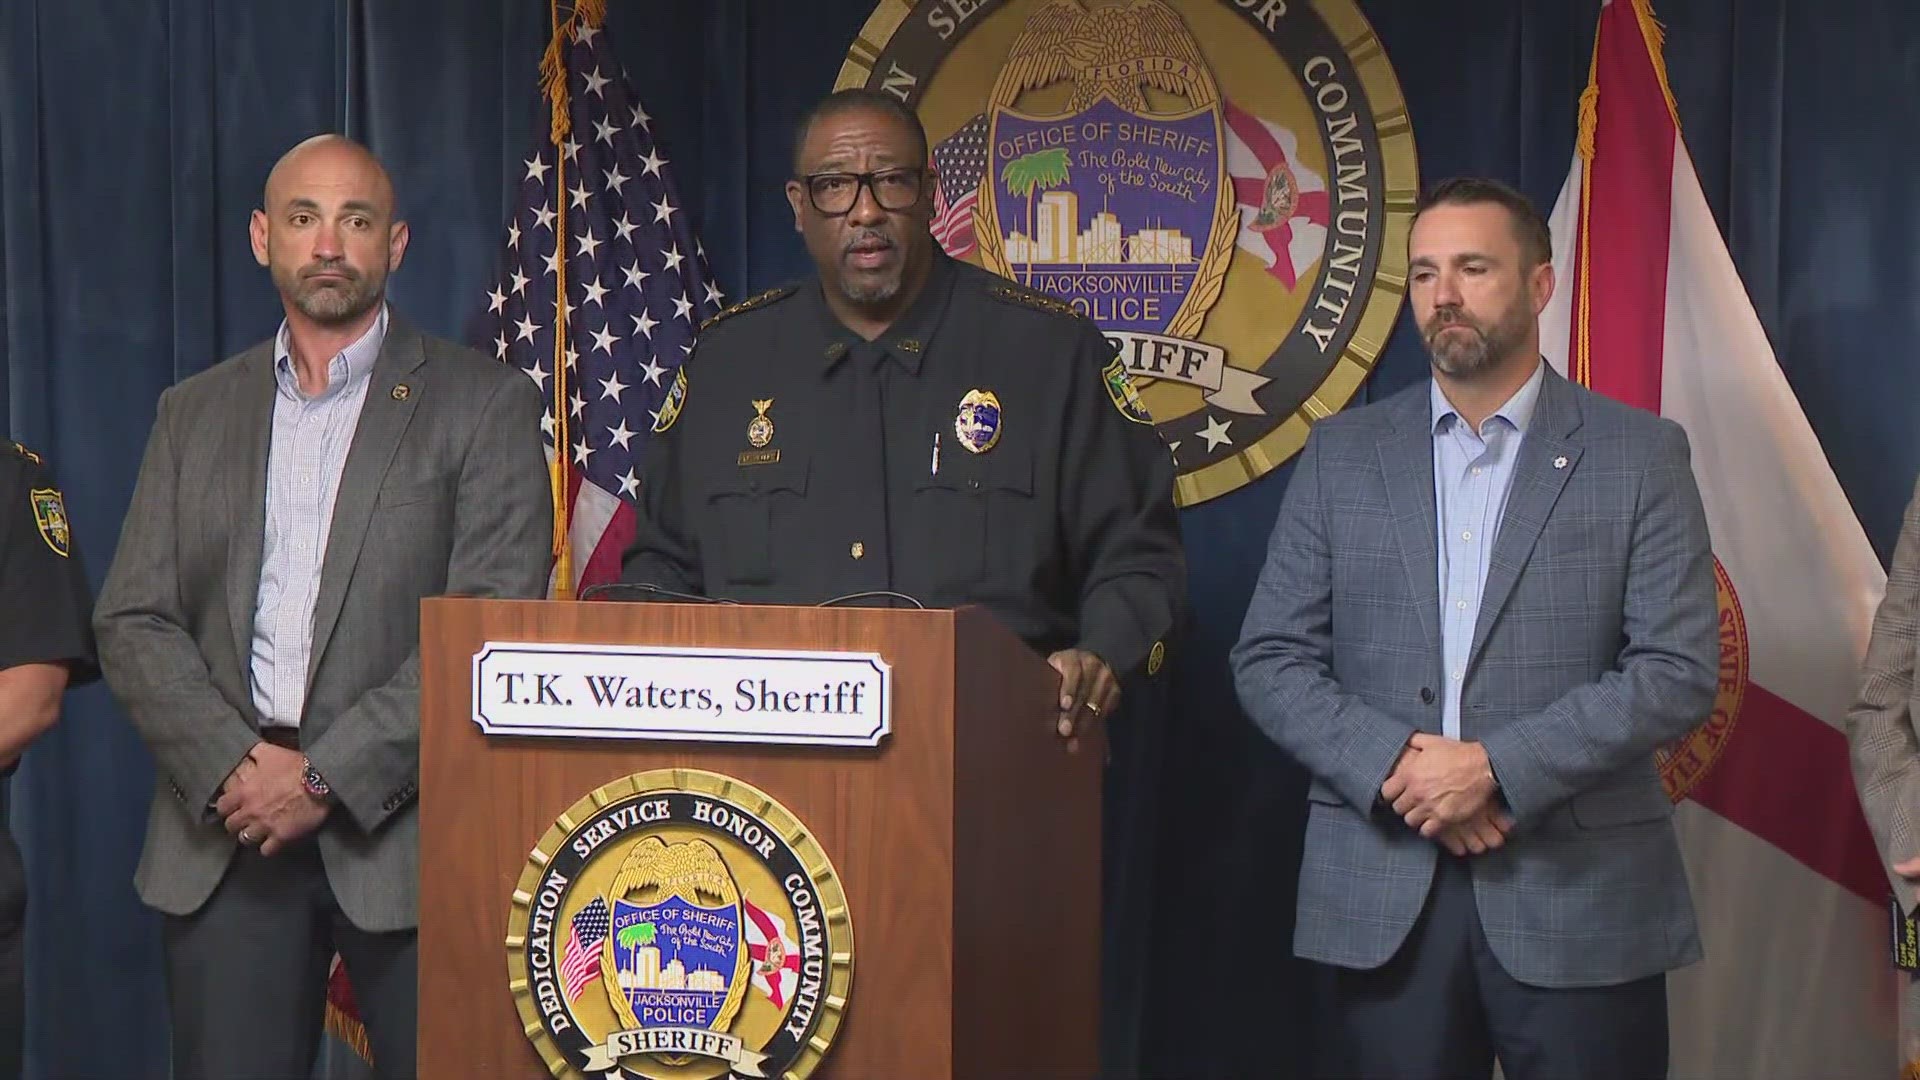 In a span of 4 days, 3 kids in Jacksonville have been shot and two of them have been killed. Sheriff T.K. Waters says JSO "will not rest until justice is served."